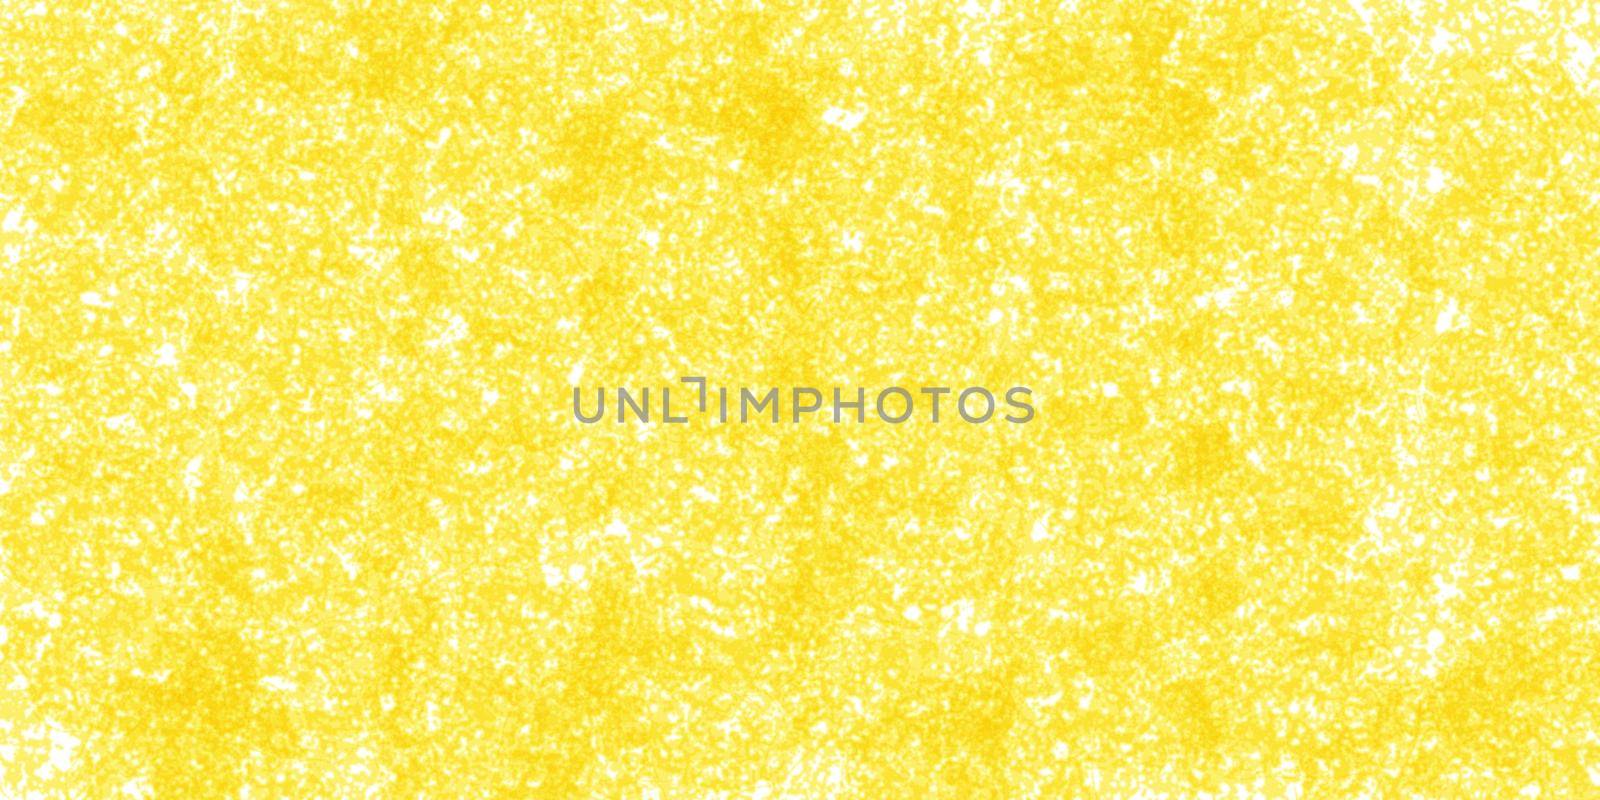 illustration of the yellow texture imitation of watercolor paint